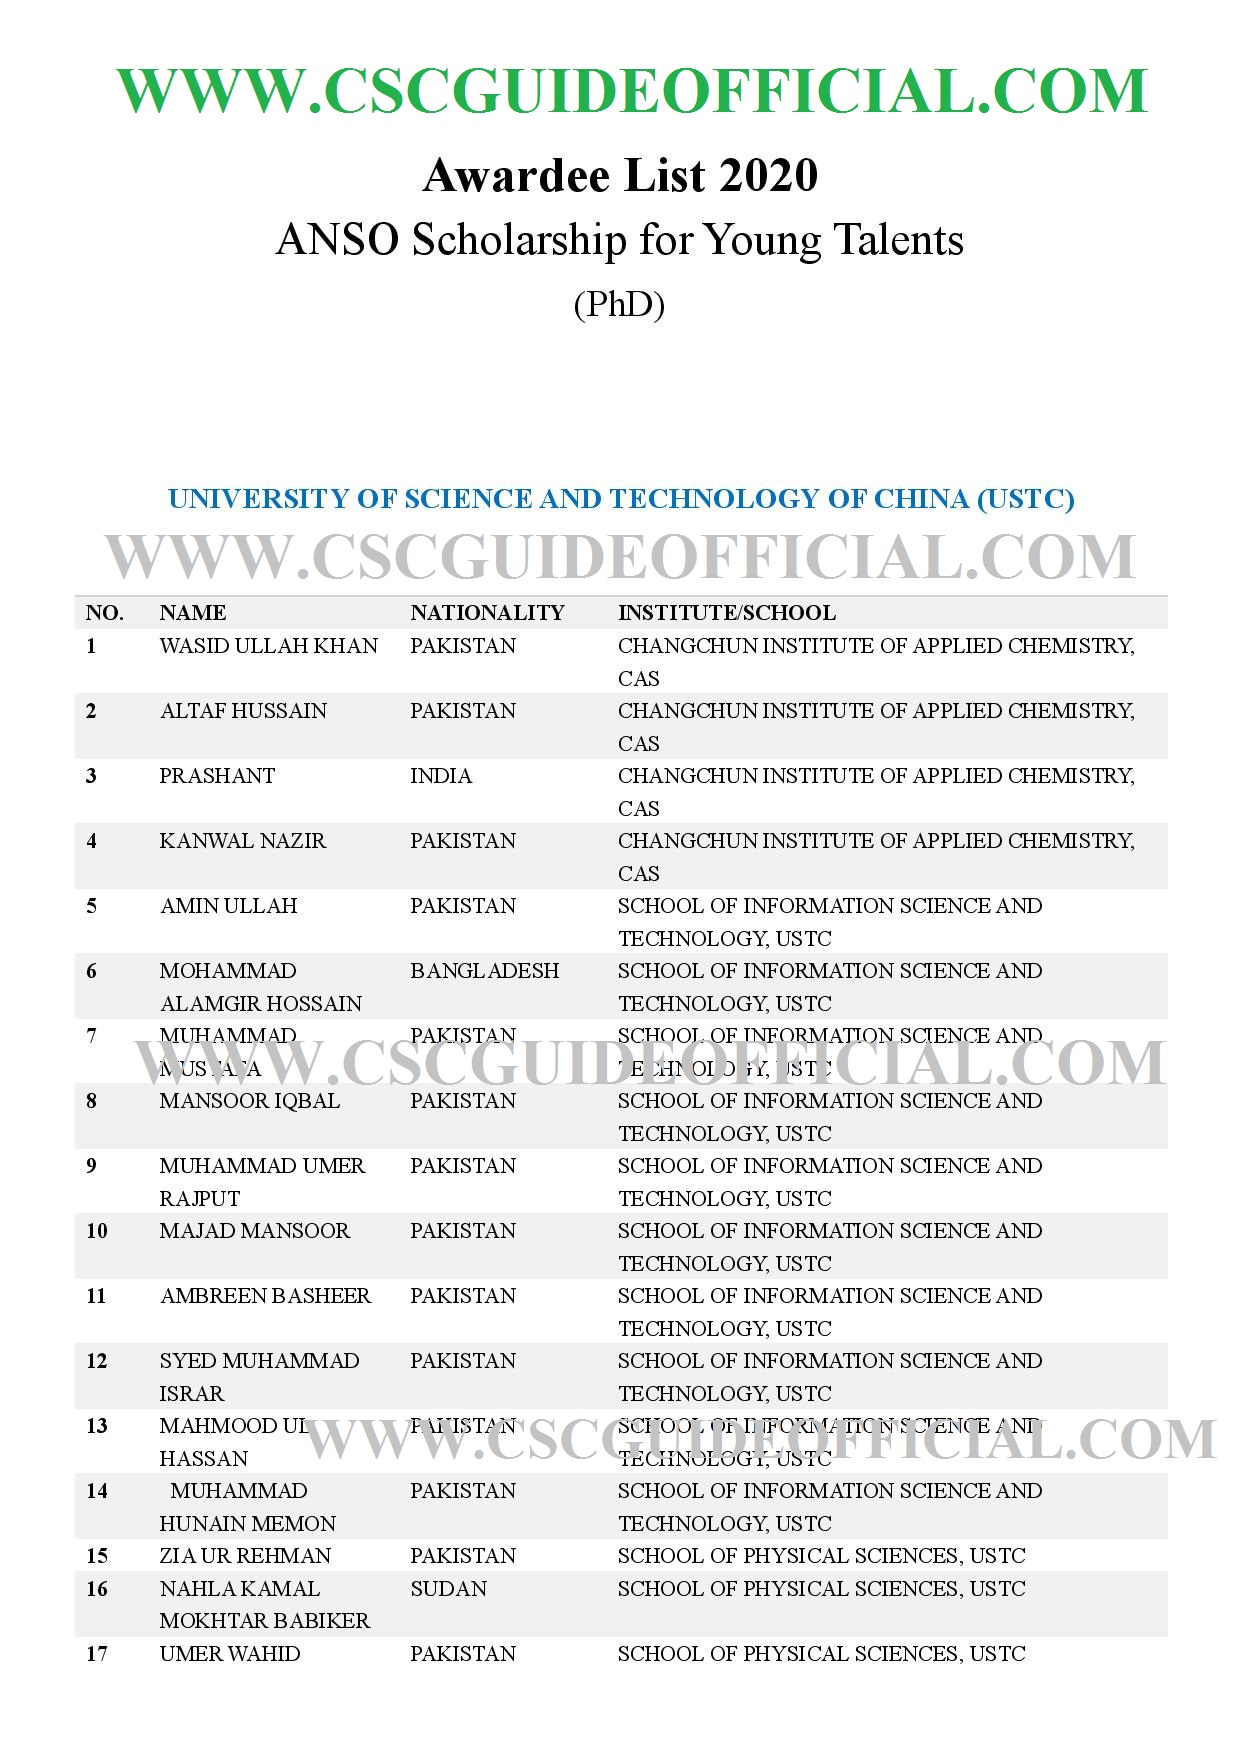 ANSO Scholarship Result 2020 PHD AWARDEE List || CSC Guide Official